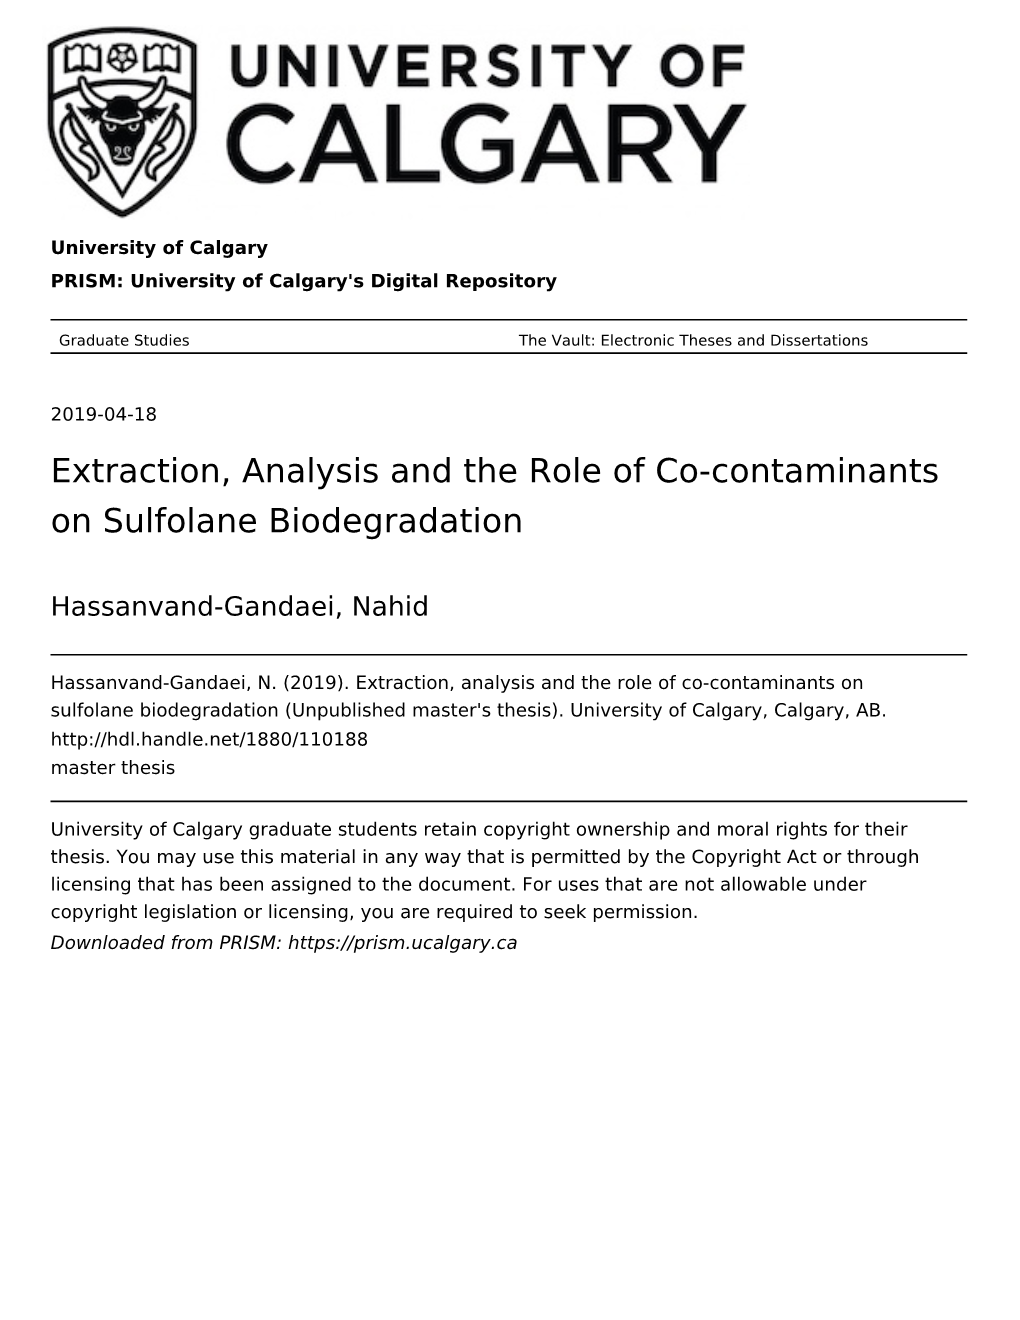 Extraction, Analysis and the Role of Co-Contaminants on Sulfolane Biodegradation